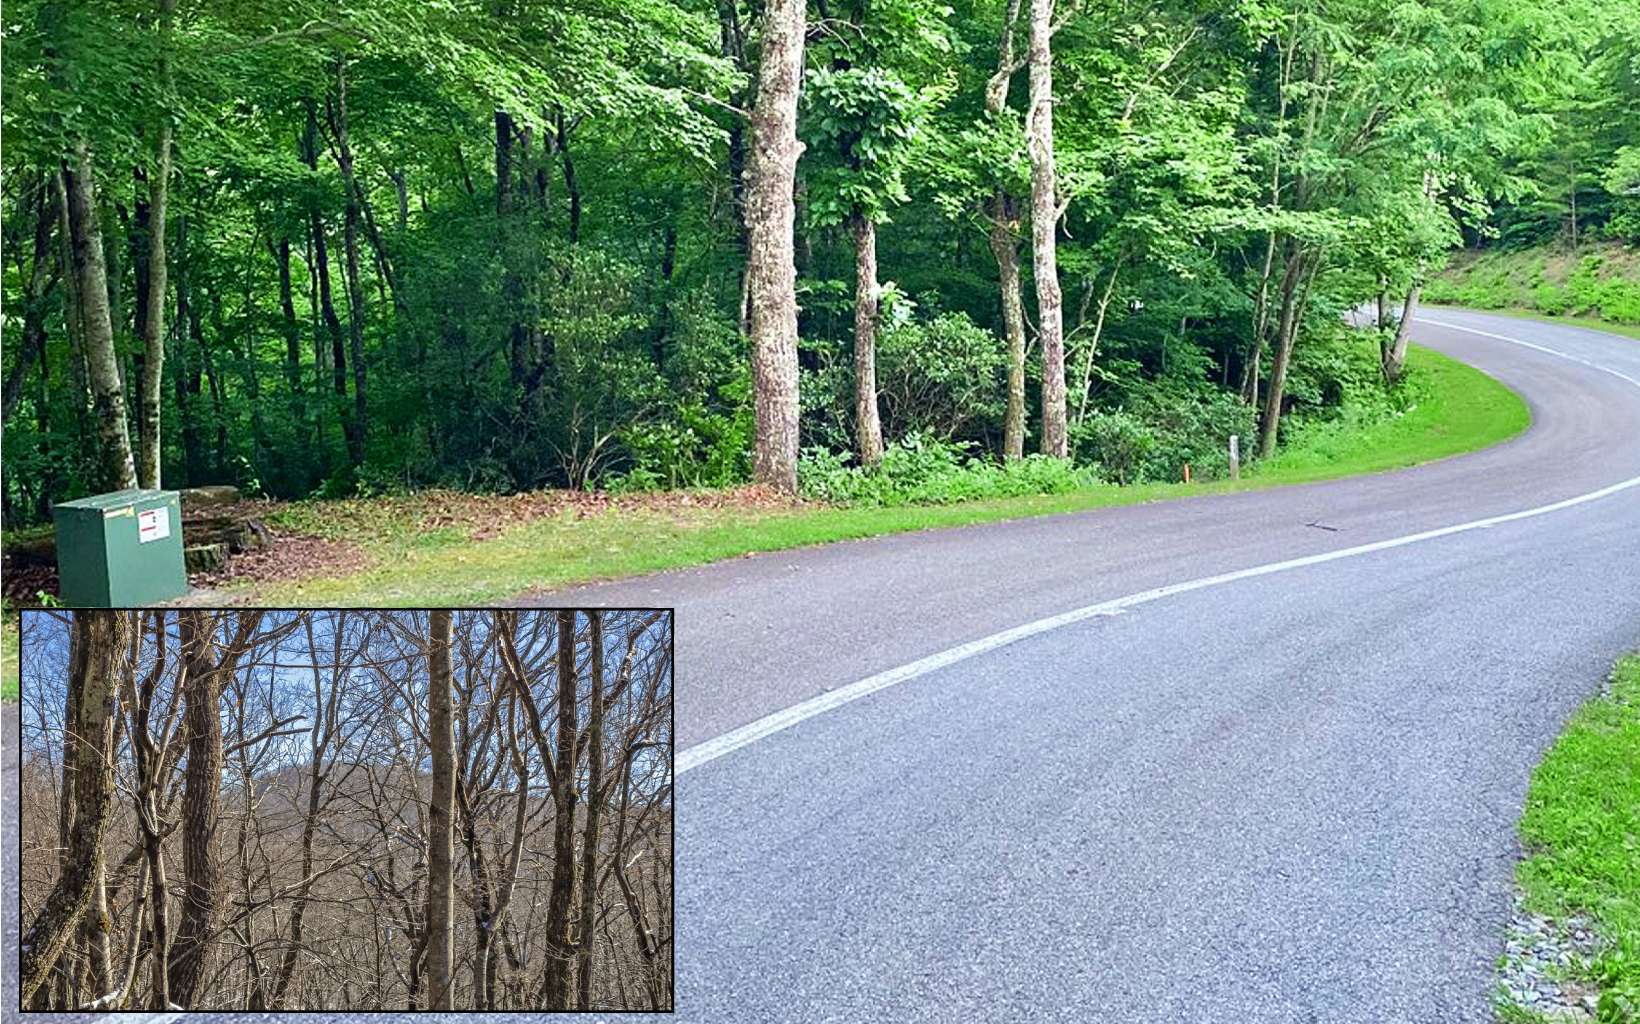 Beautiful 3.5AC lot at over 2600' in elevation with YEAR-ROUND MOUNTAIN VIEWS of Burnt Mountain with some tree trimming. Mature hardwoods cover the property with a very nice level and private building site located further back from the road. A new trail now conveniently leads to the building site from the parking area on the lot. With all-paved road access and underground utilities, The Georgian Highlands community is a well-maintained peaceful gated community known for generous size lots and higher-end homes (note: Short-Term Rentals are not permitted to ensure continued tranquility). The Georgian Highlands contains several thousand acres of serenity with 80% of the land being set aside as unspoiled green space teeming with wildlife.